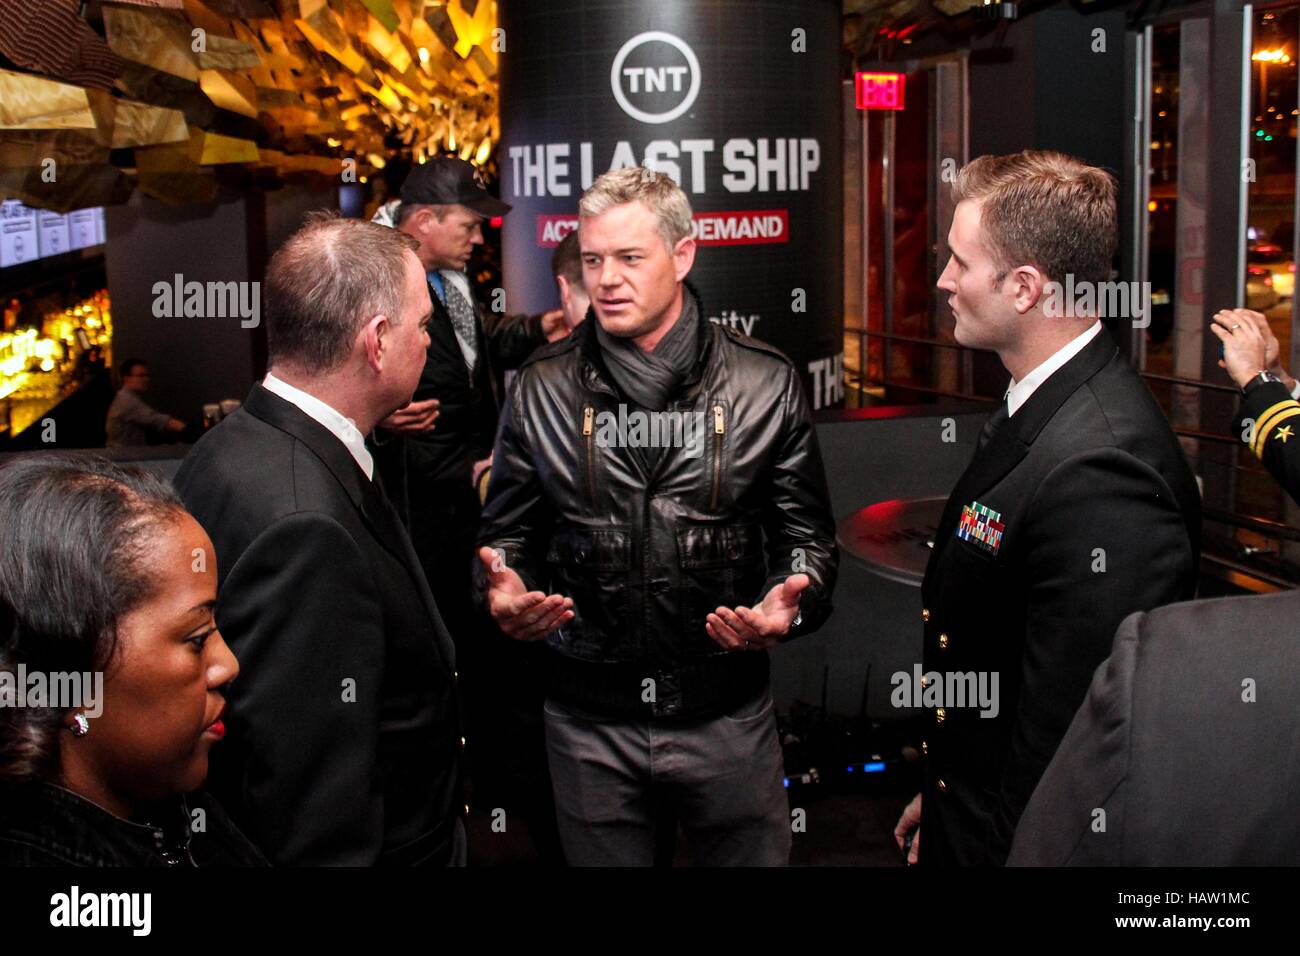 TNT TV show The Last Ship actor Eric Dane (middle) talks with U.S. Navy Office of Information East Director Corey Barker (left) during the NBA All Star game party at Clyde Frazier's Wine and Dine restaurant February 15, 2015 in New York City, New York. Stock Photo